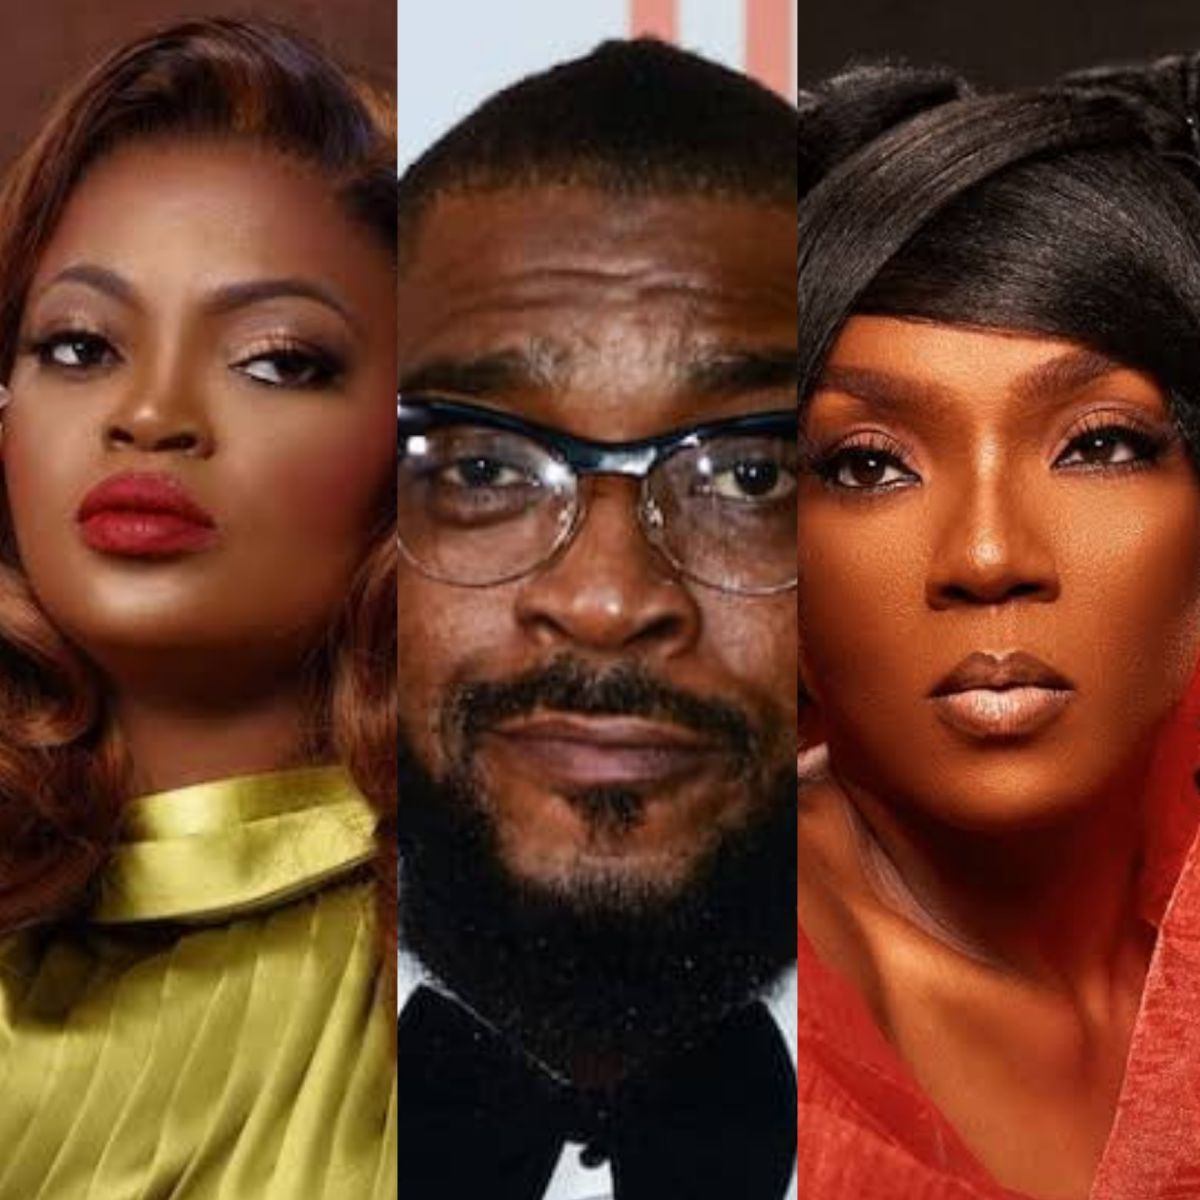 Inkblot Joins Forces With Funke Akindele, Chidi Mokeme, And Chioma Chukwuka For The Crime Thriller &Quot;No Way Through&Quot; 1